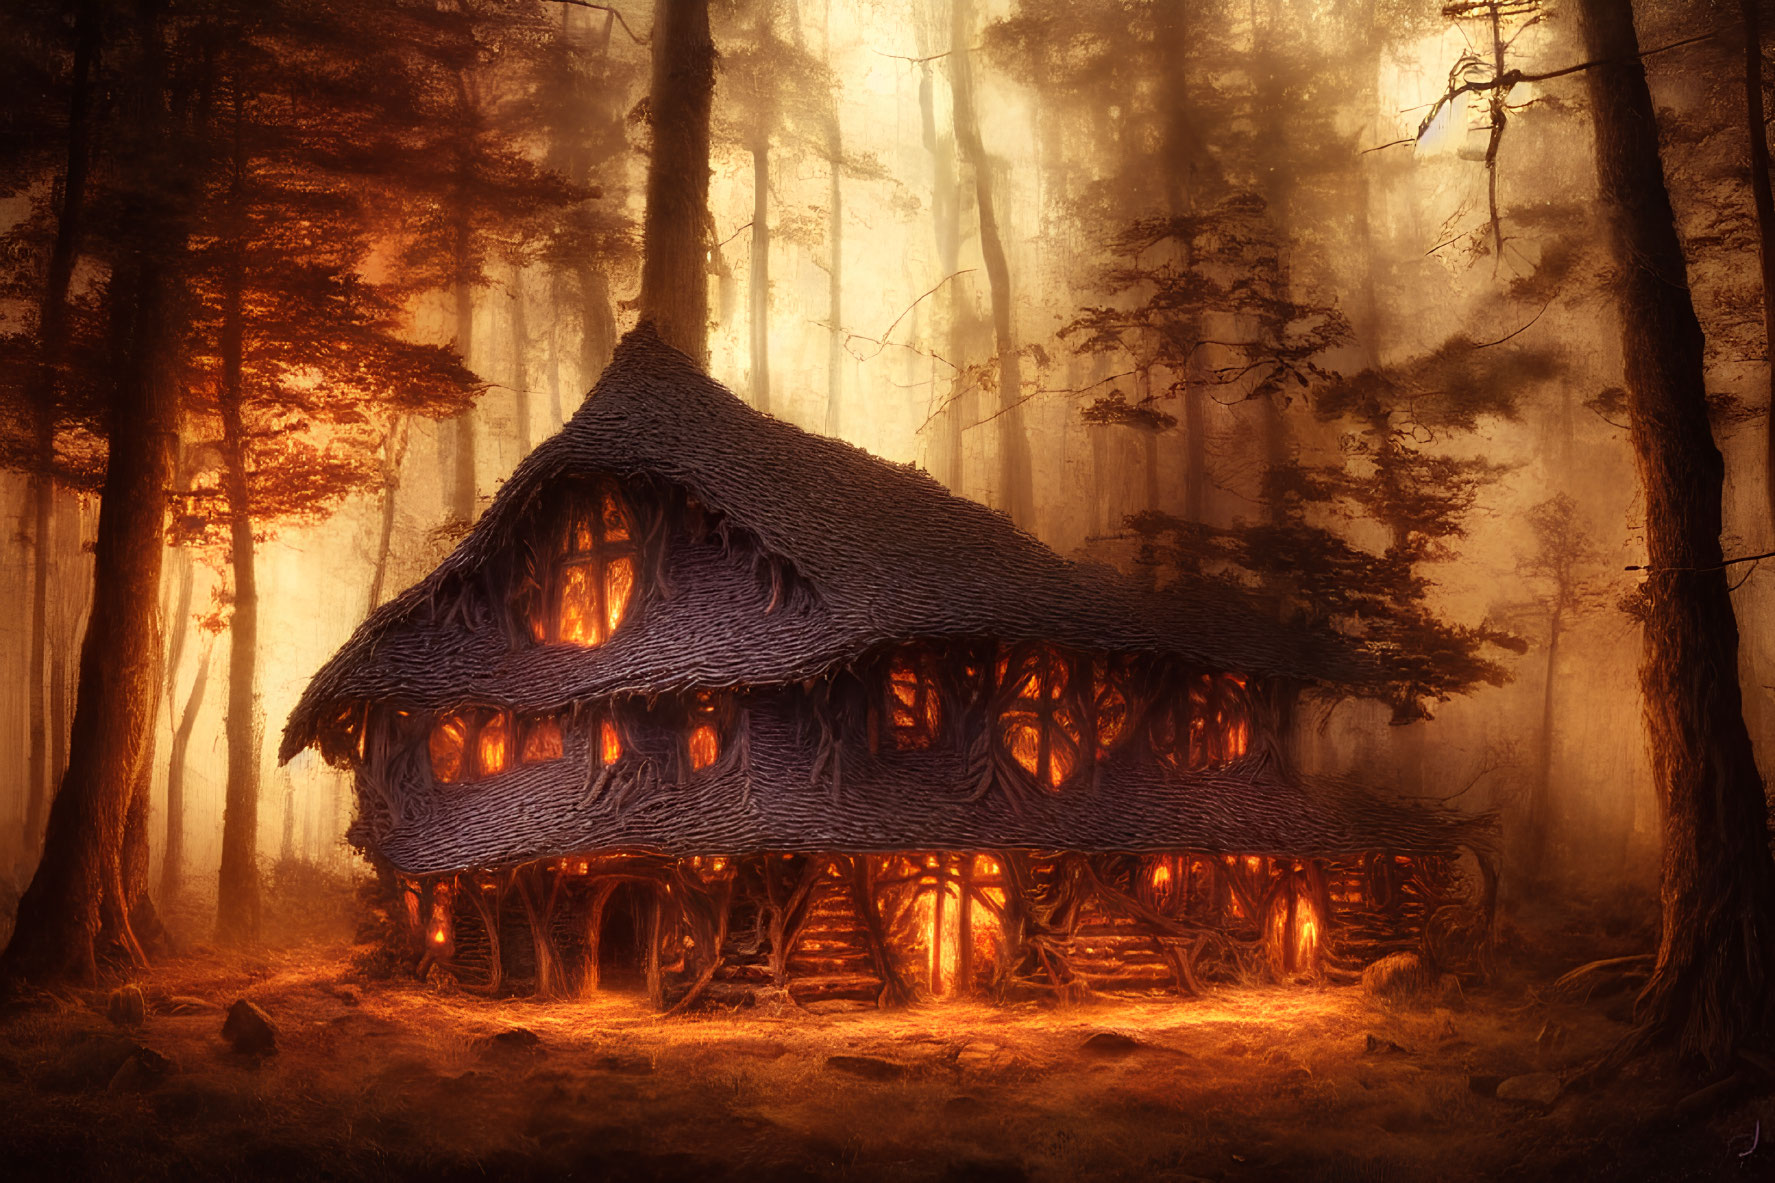 Enchanted cottage in mystical foggy forest with glowing windows